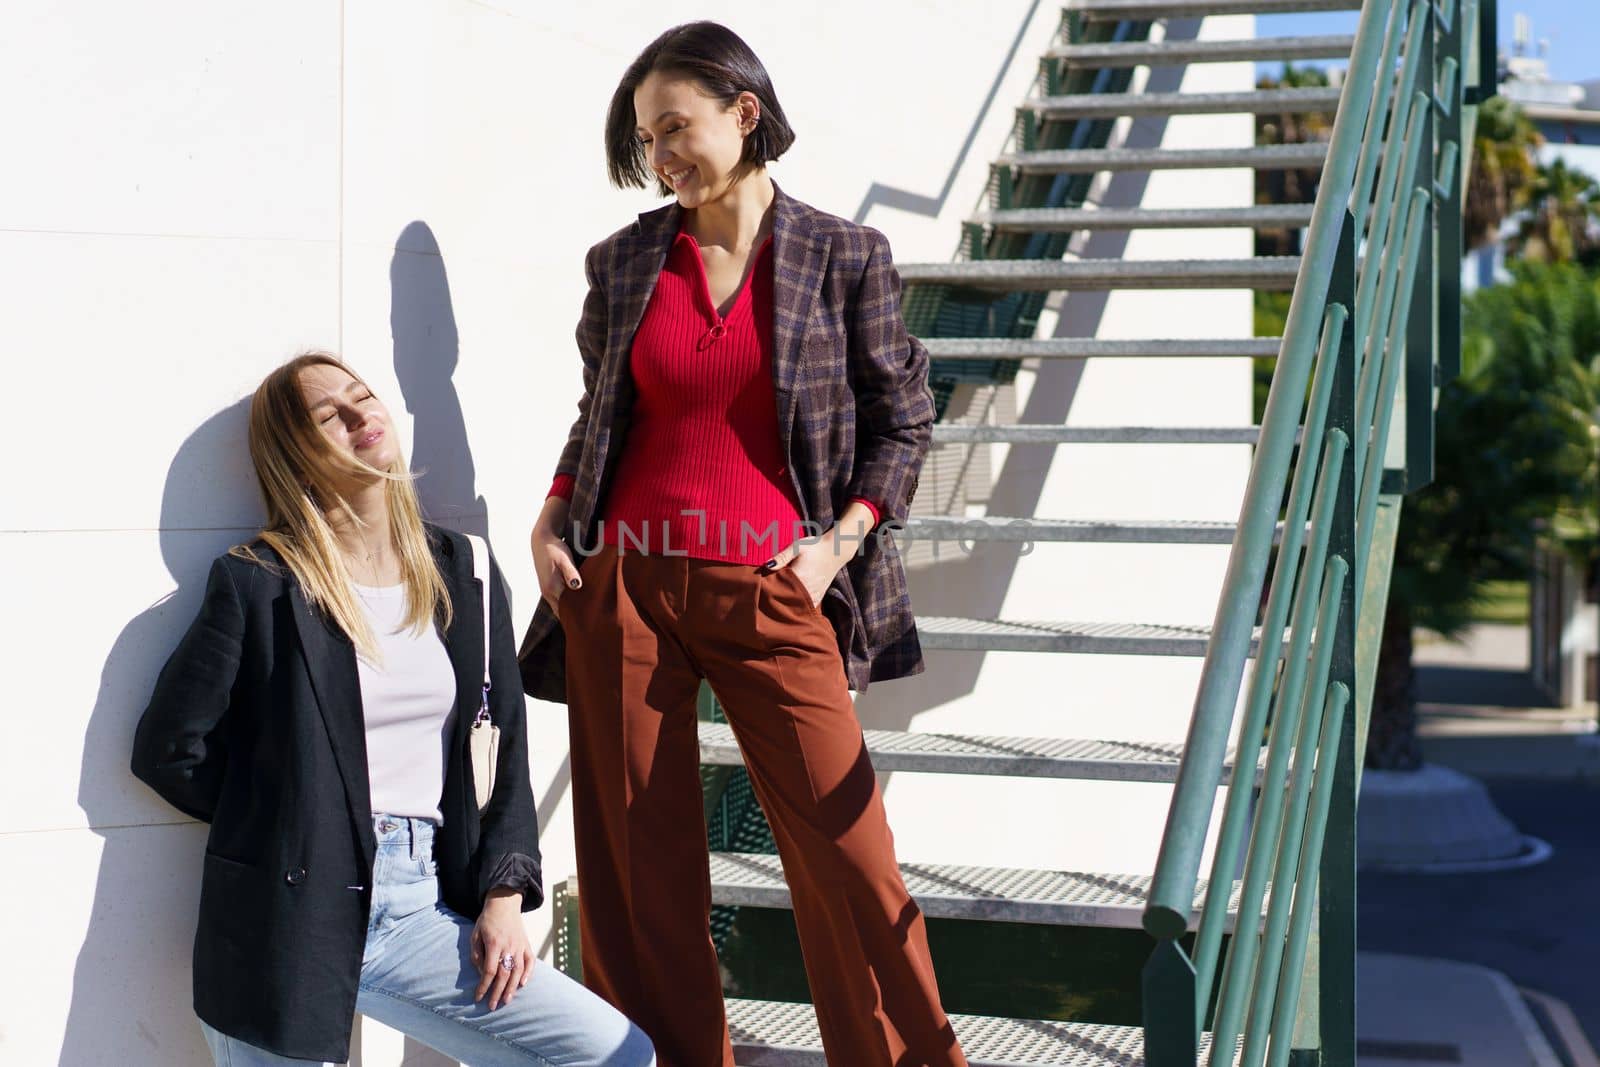 Content young women best friends in stylish outfits enjoying sunny day standing on staircase in city park